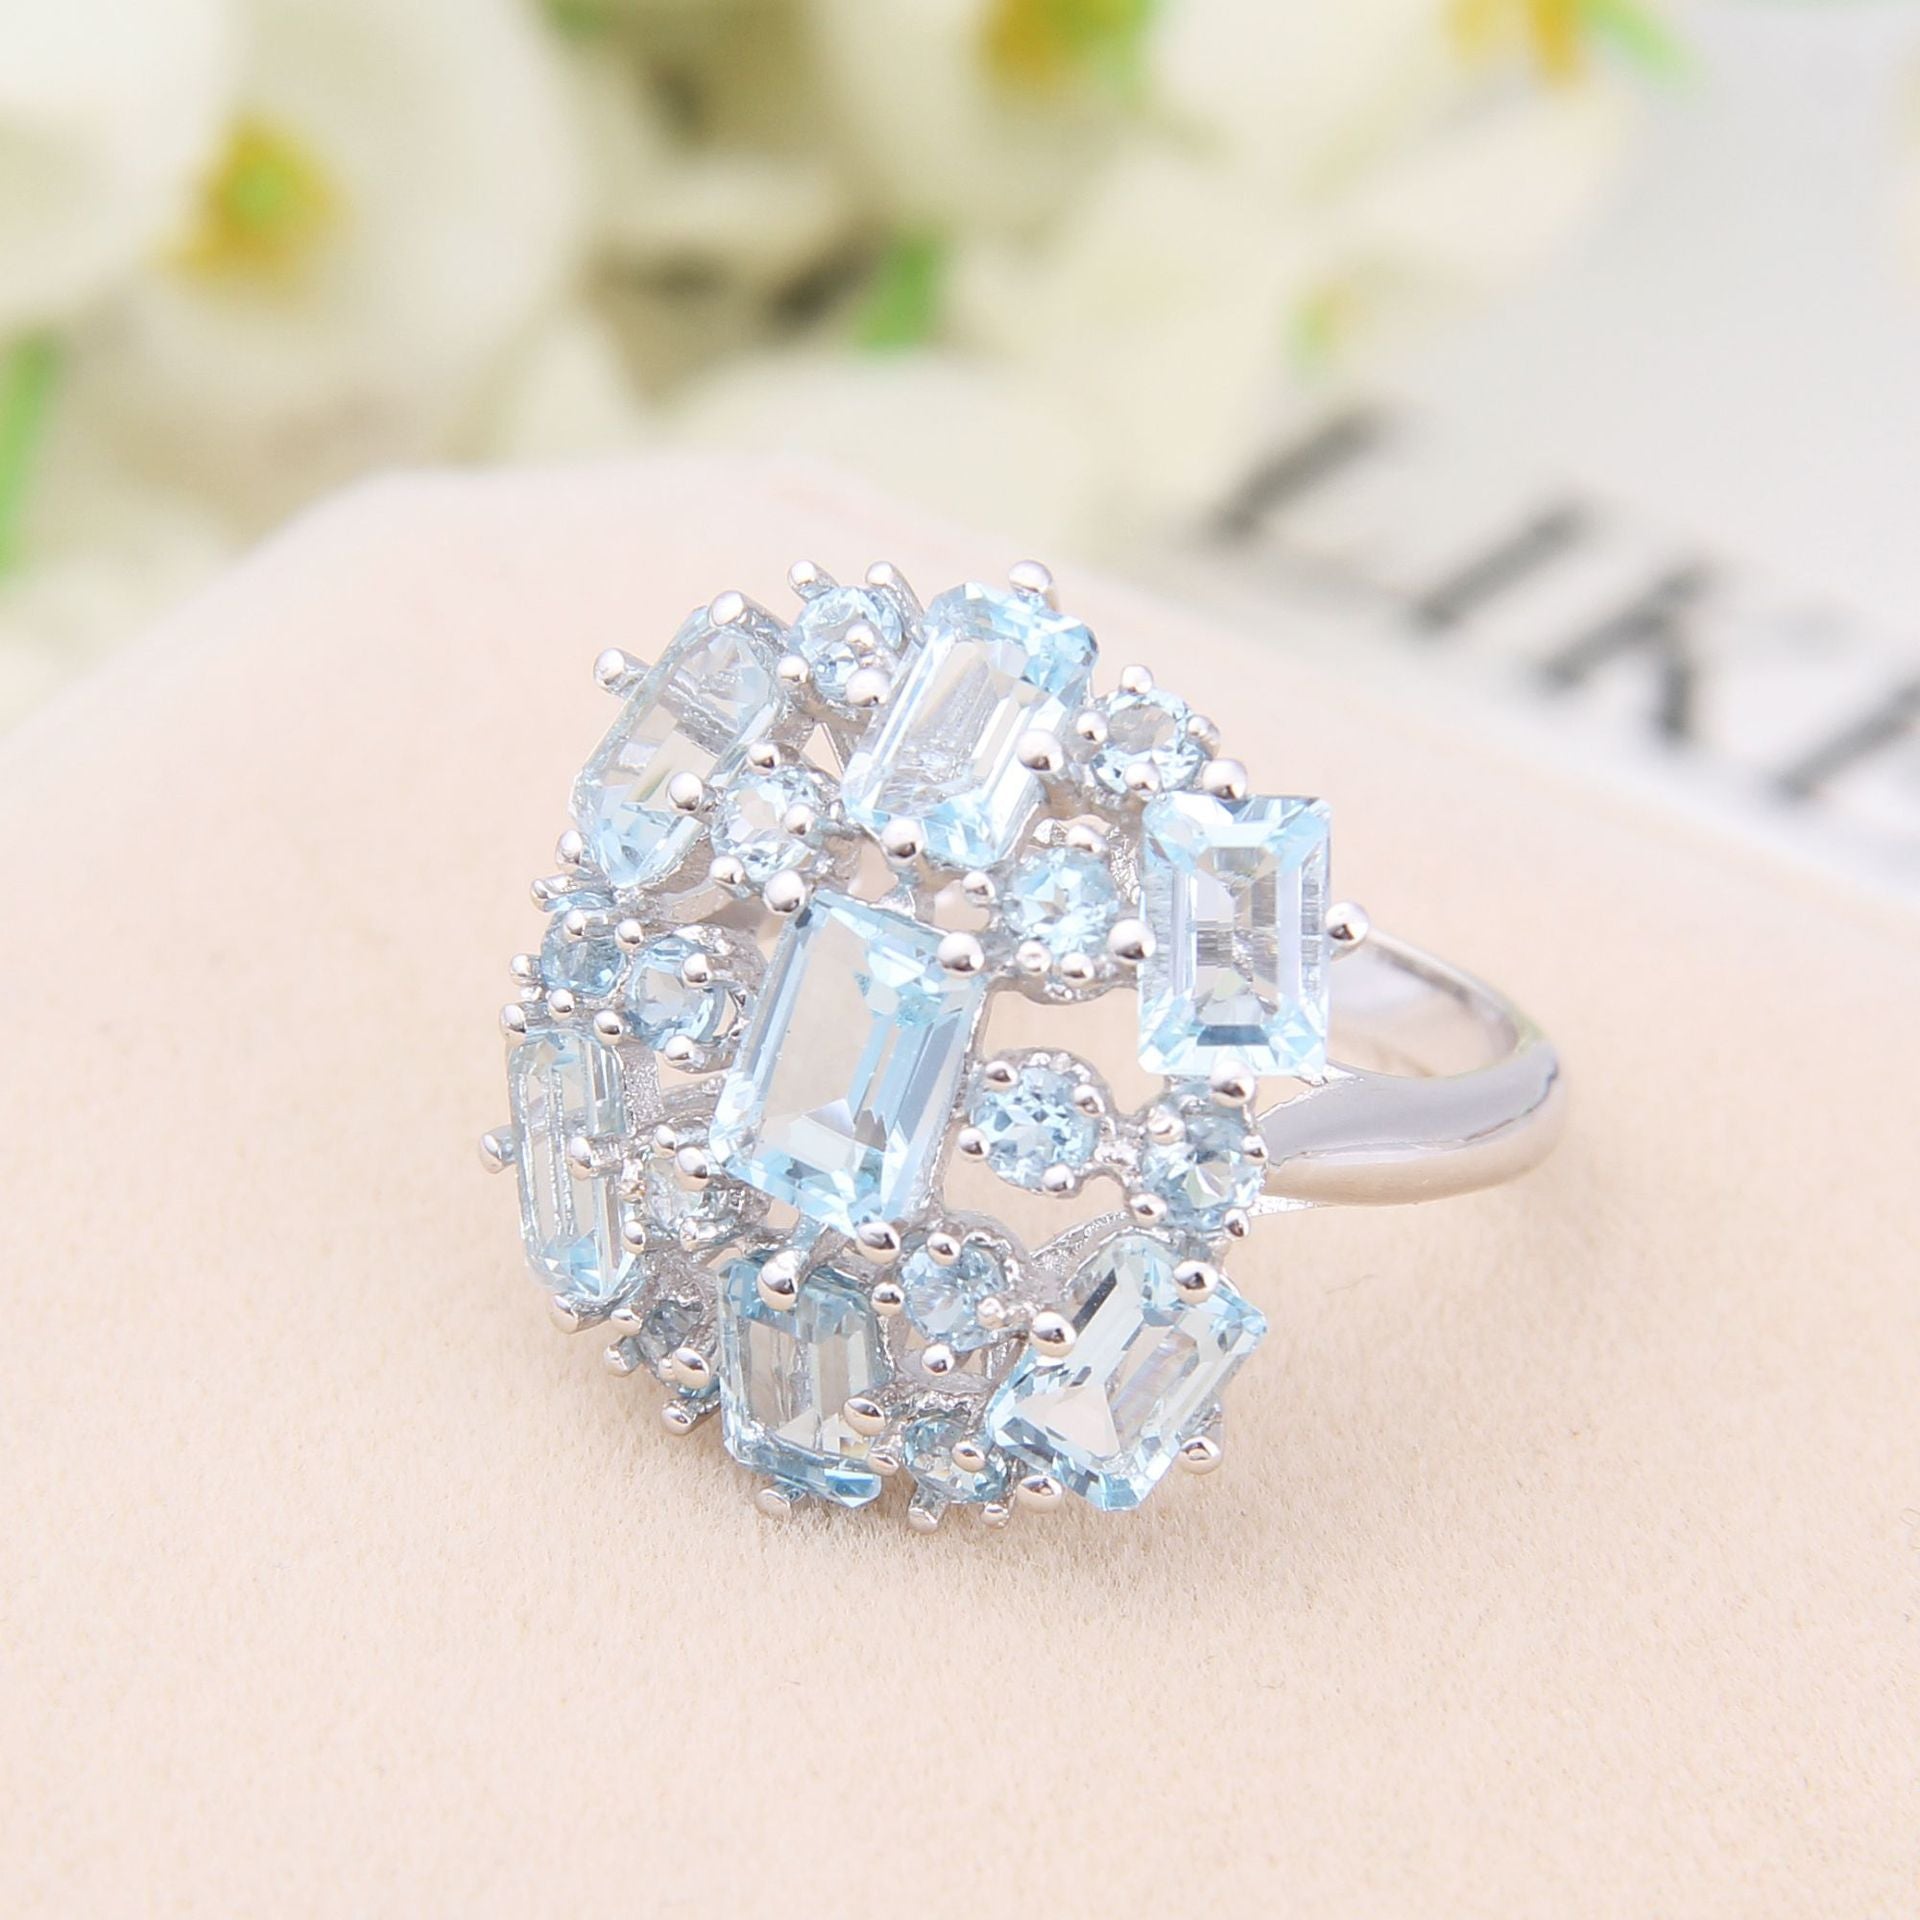 Luxury Group Natural Topaz Fashion Temperament Silver Ring for Women